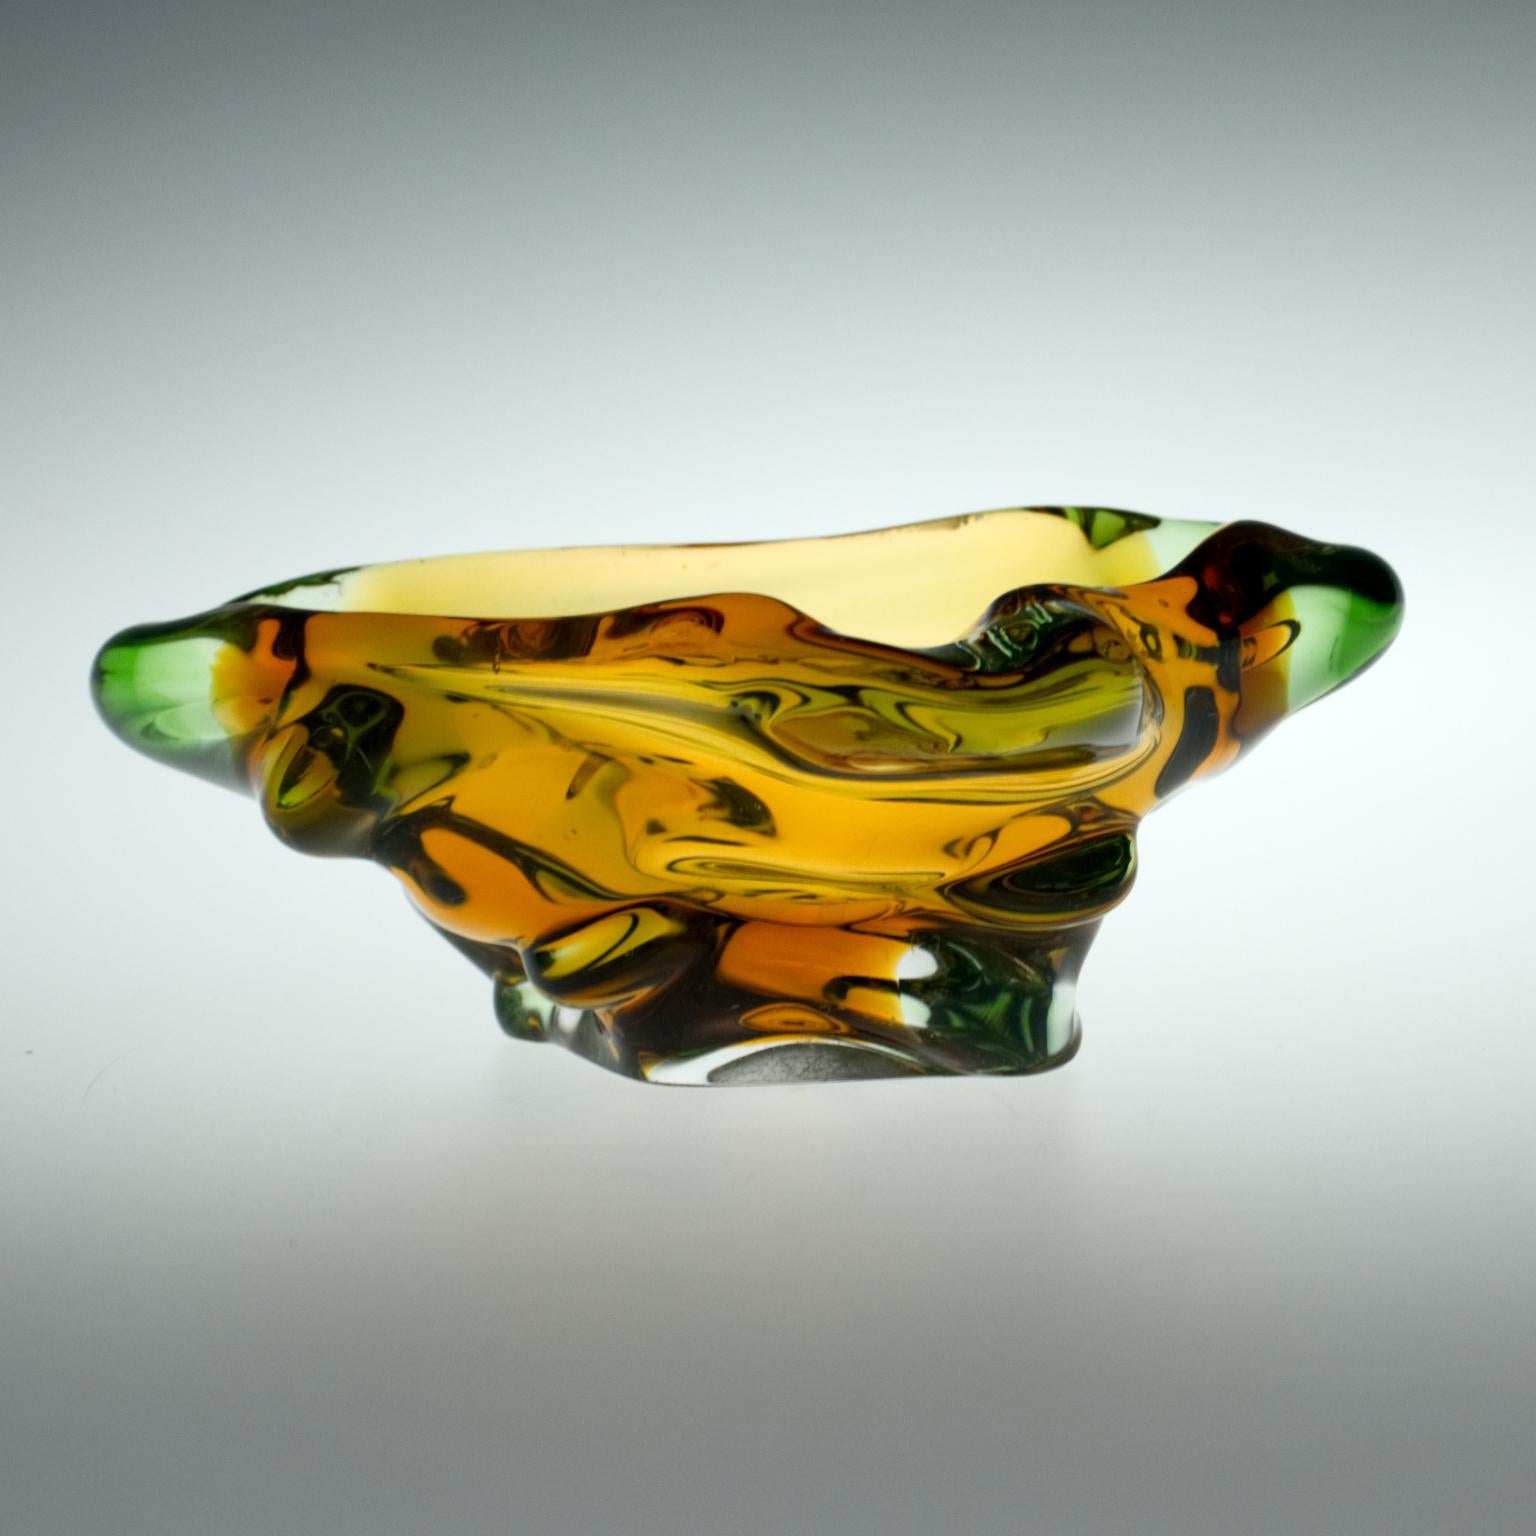 Ashtray from the set of art glass 